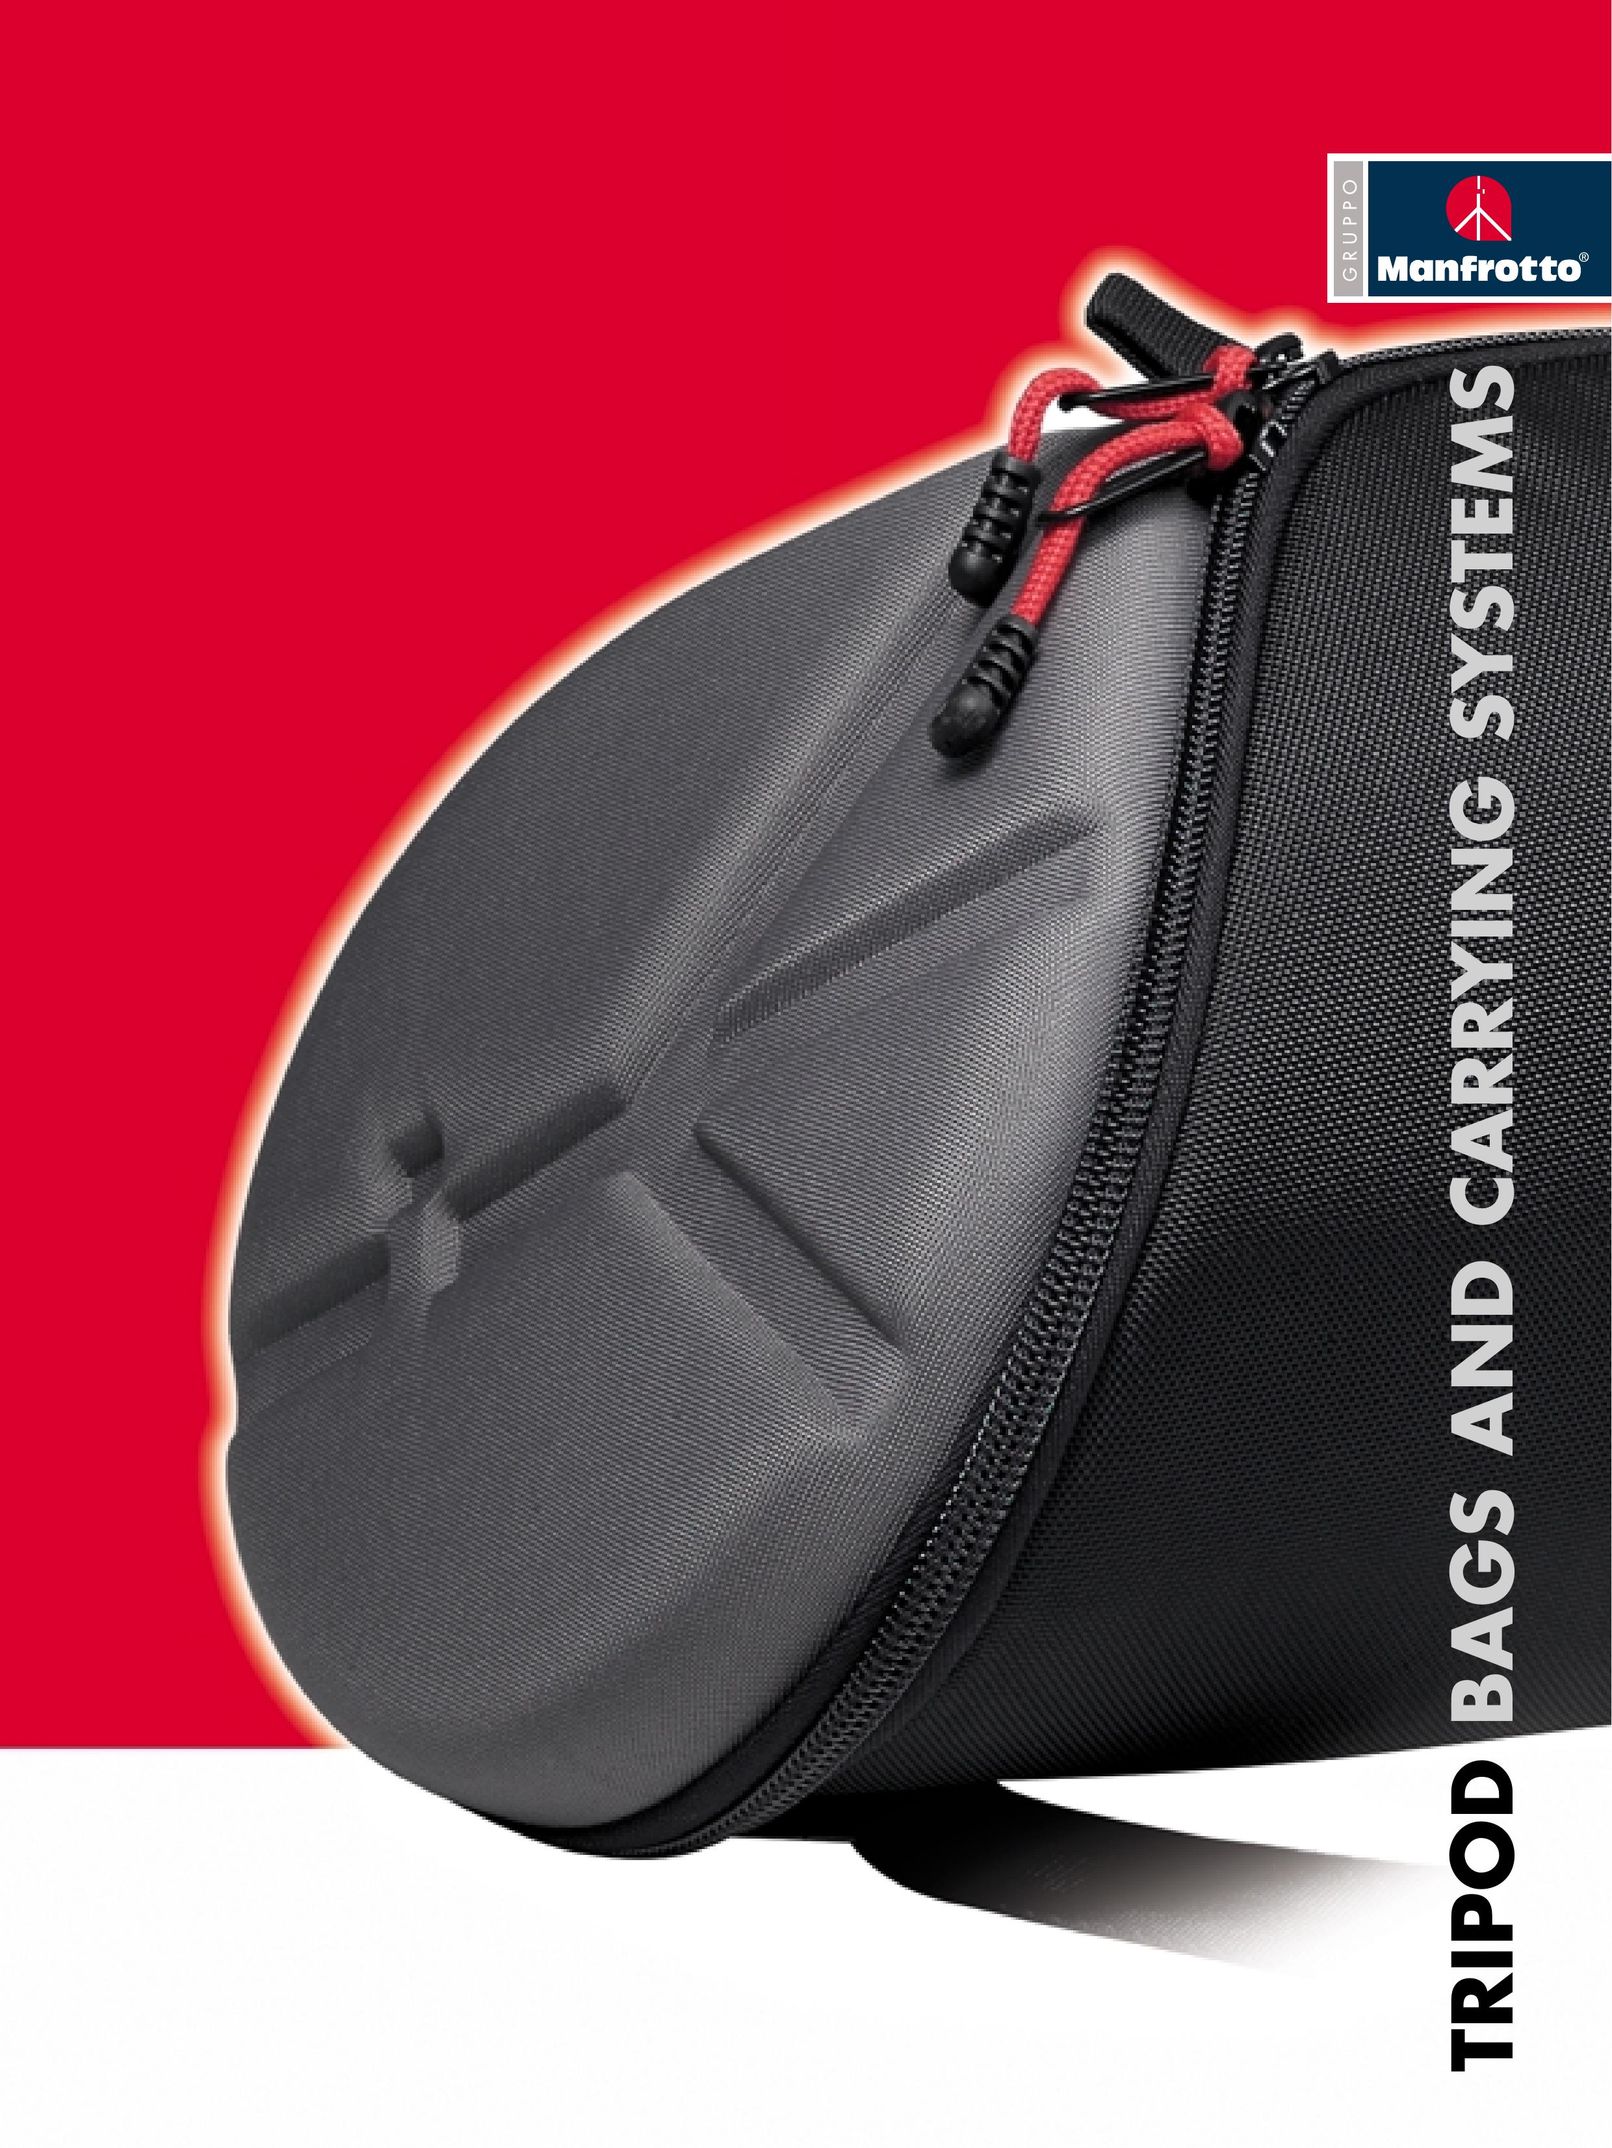 Manfrotto MBAG80P Carrying Case User Manual